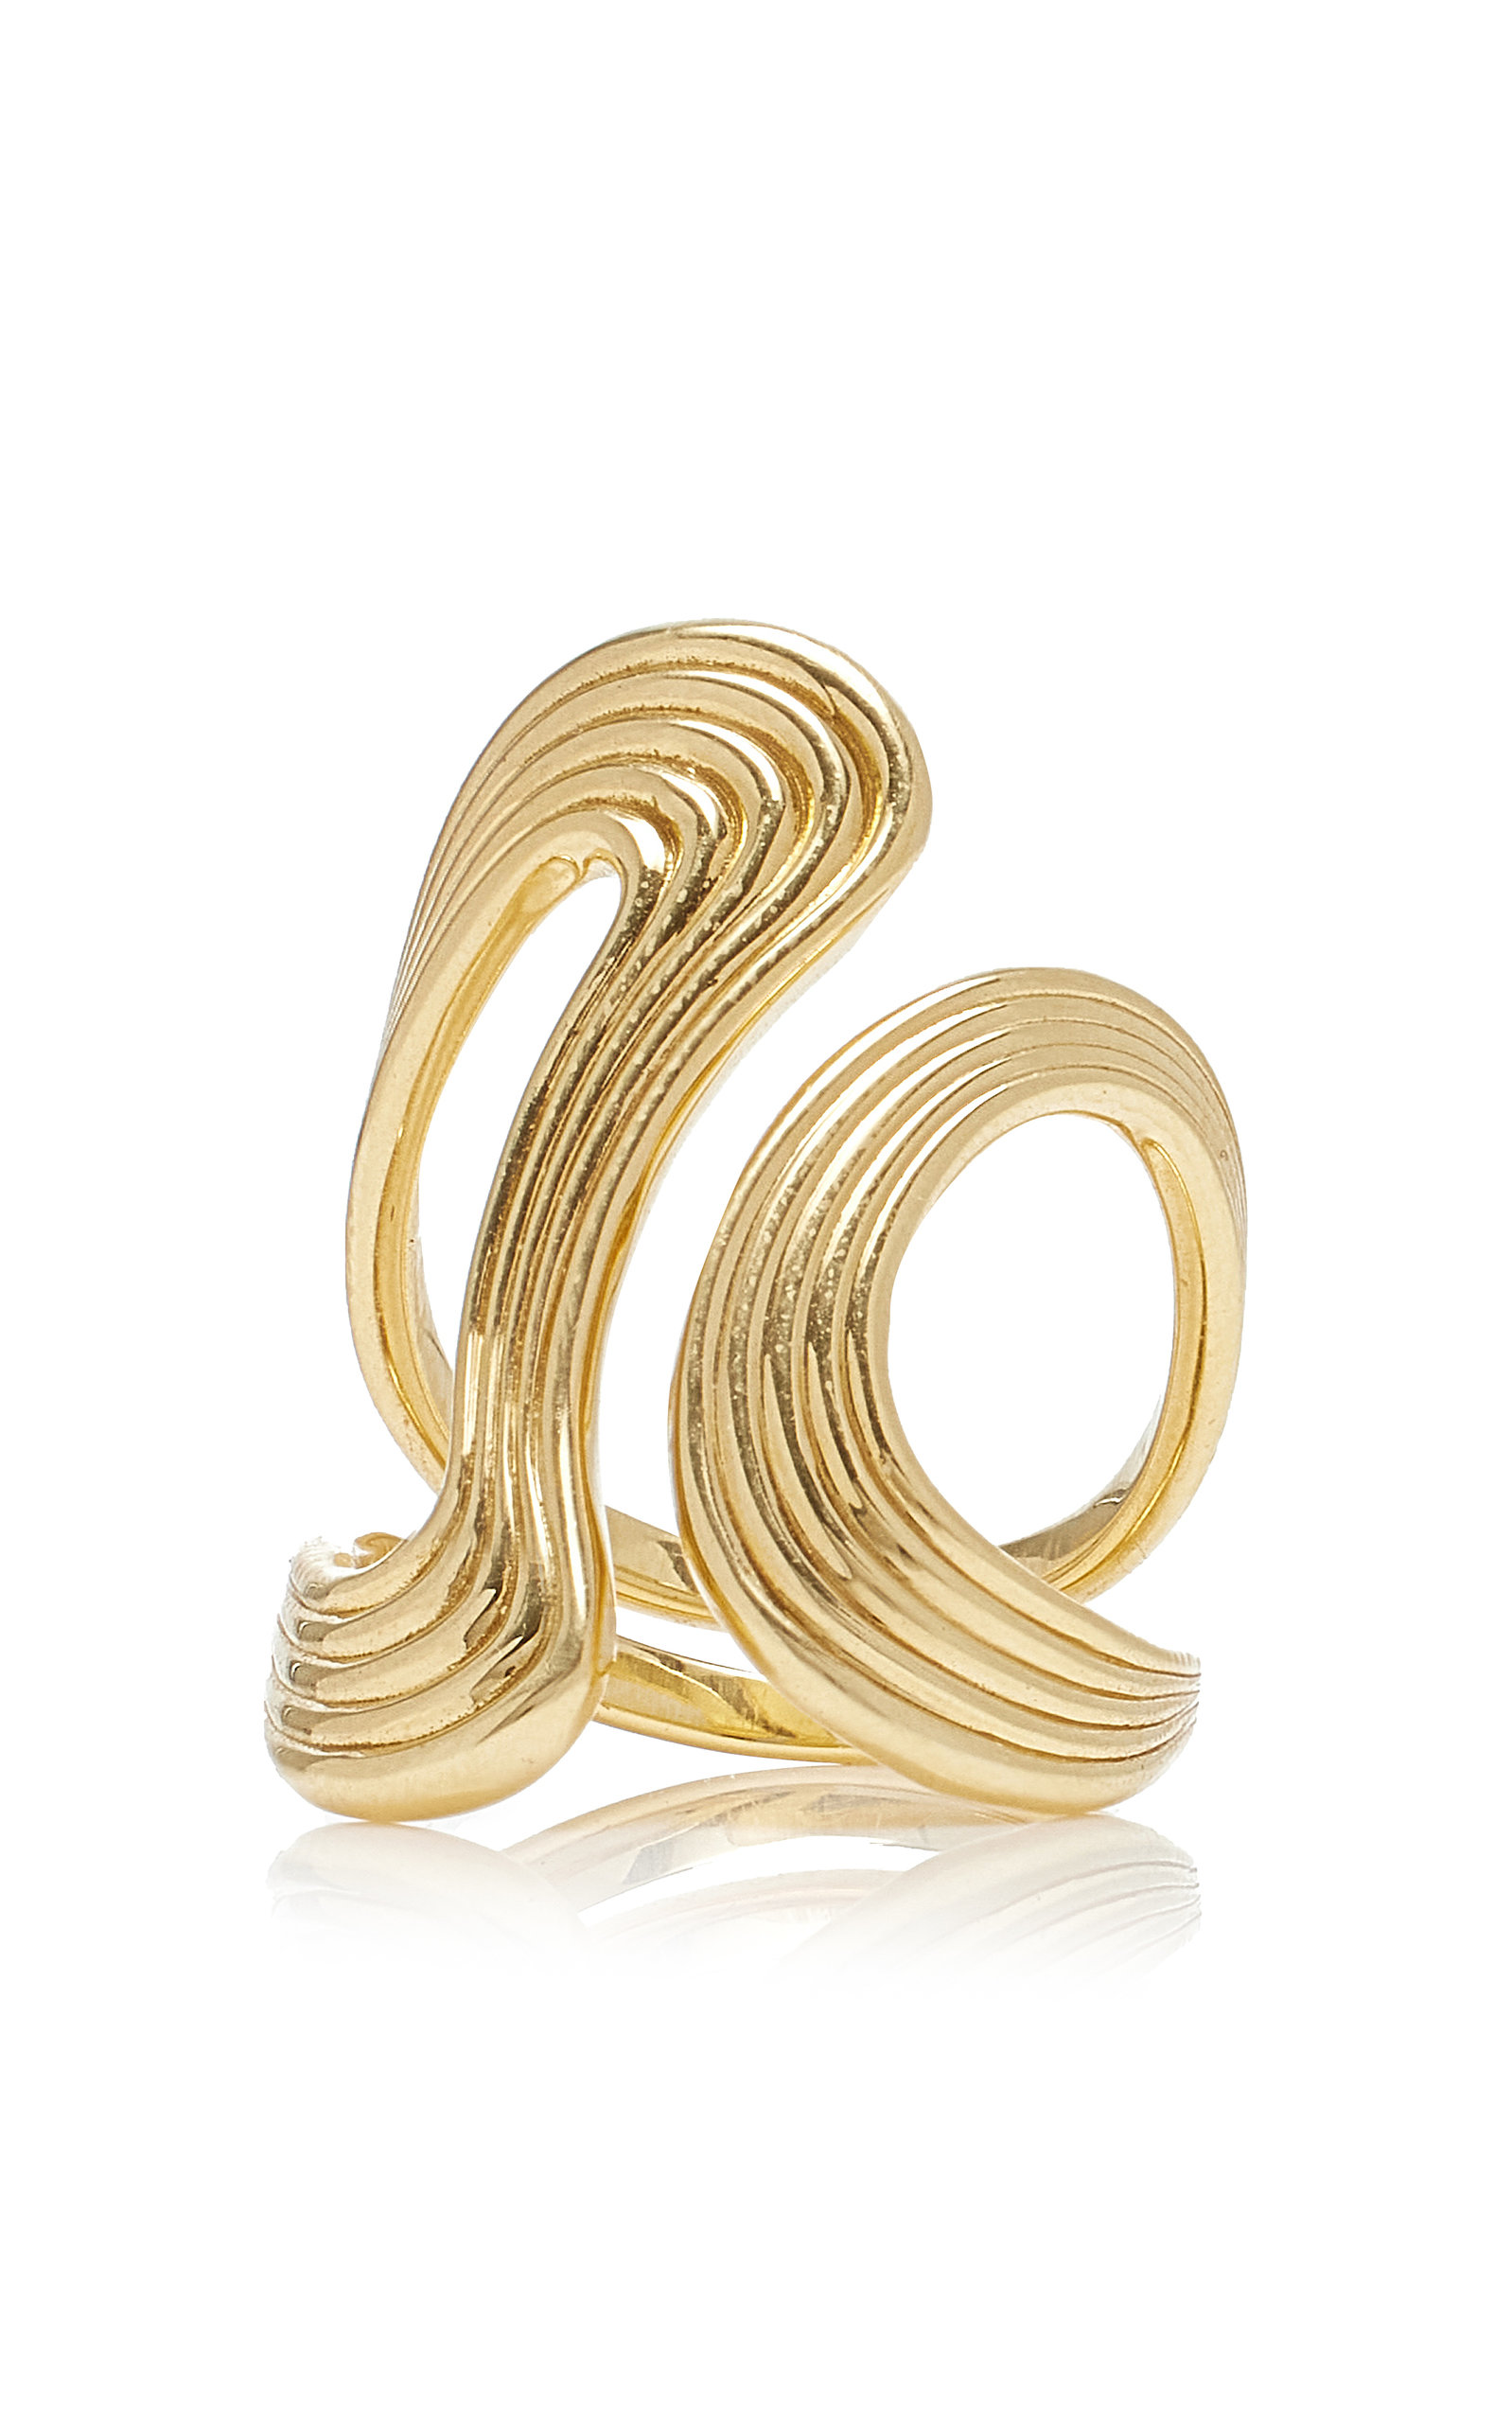 The Stream Lines 18K Yellow Gold Ring